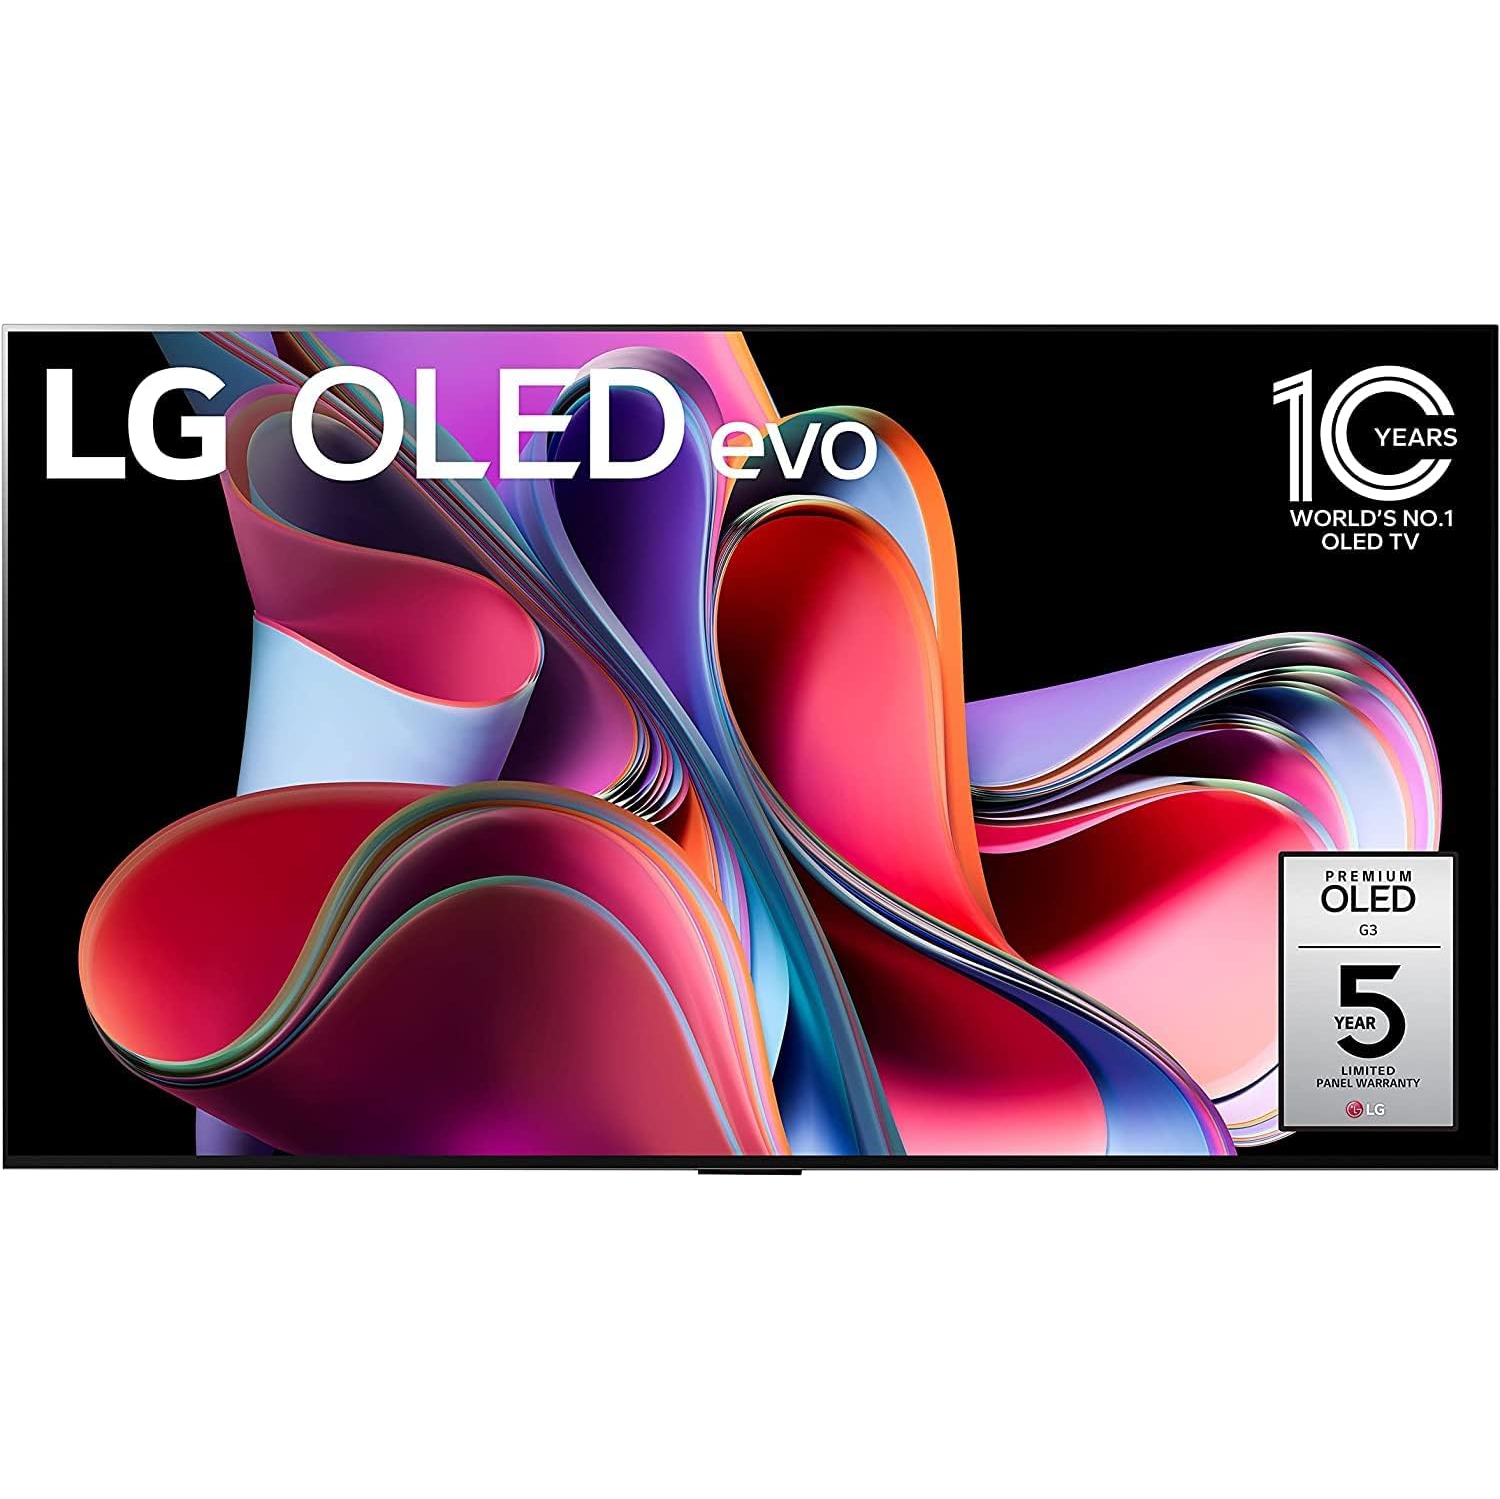 Open Box - LG G3 MLA OLED evo 65-inch Gallery Edition 4K Smart TV - AI-Powered, Alexa Built-in, Gaming, 120Hz Refresh, VRR, Brightness Boost Max, 65" Television